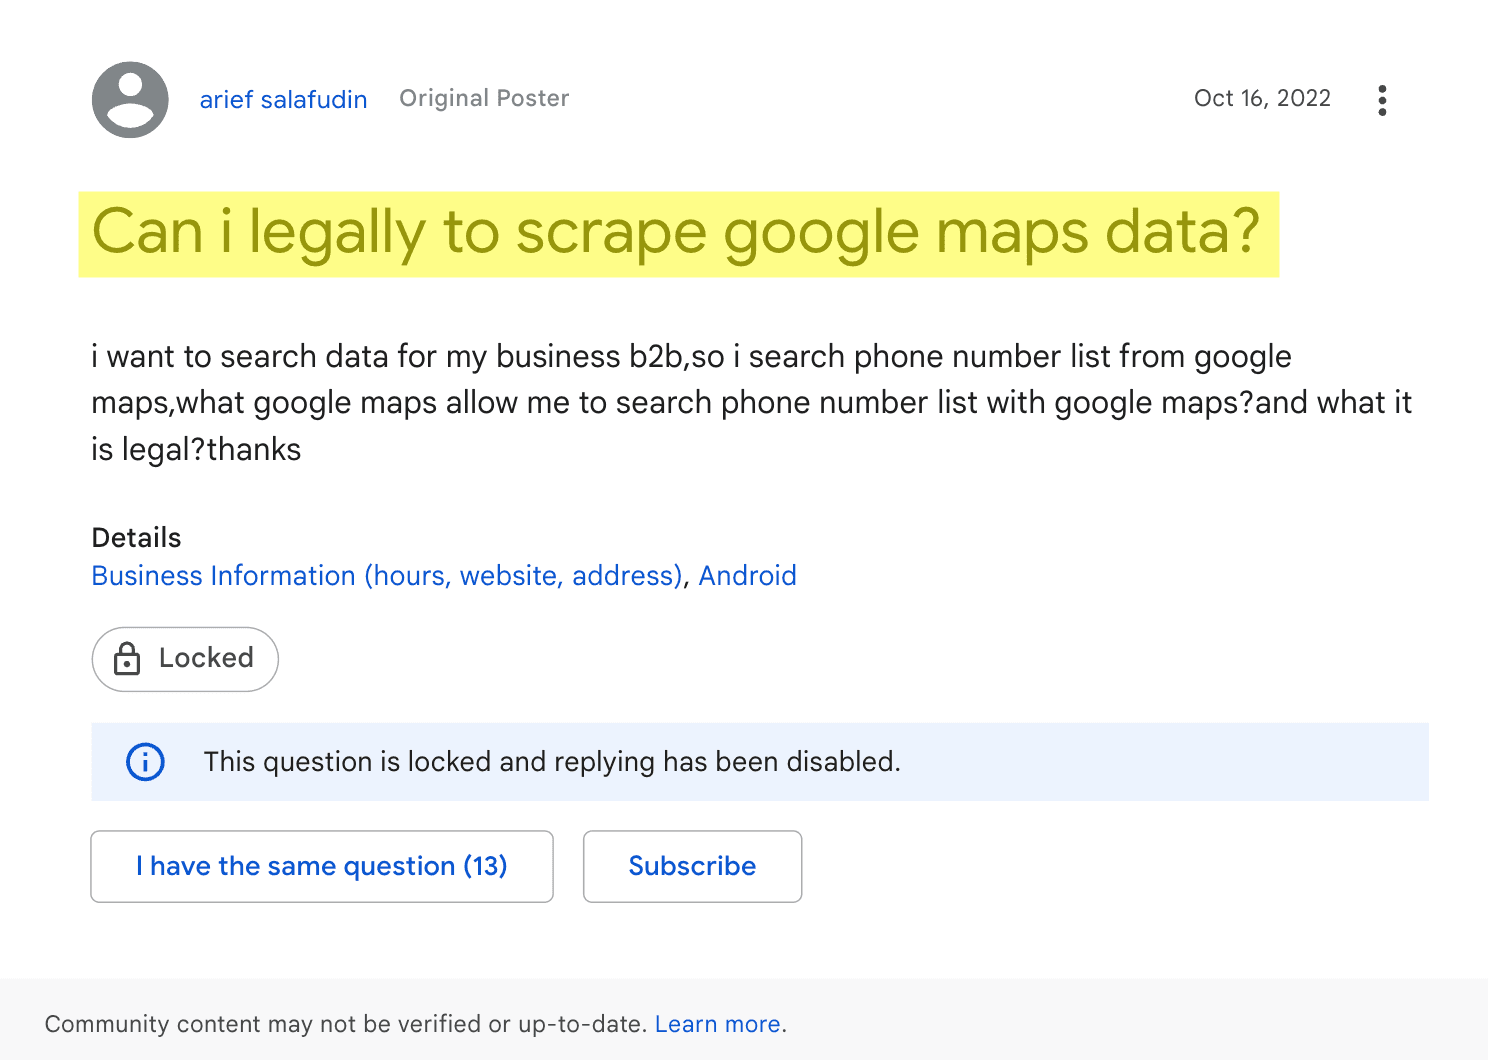 can i legally scrap google maps data google discussion - image4.png